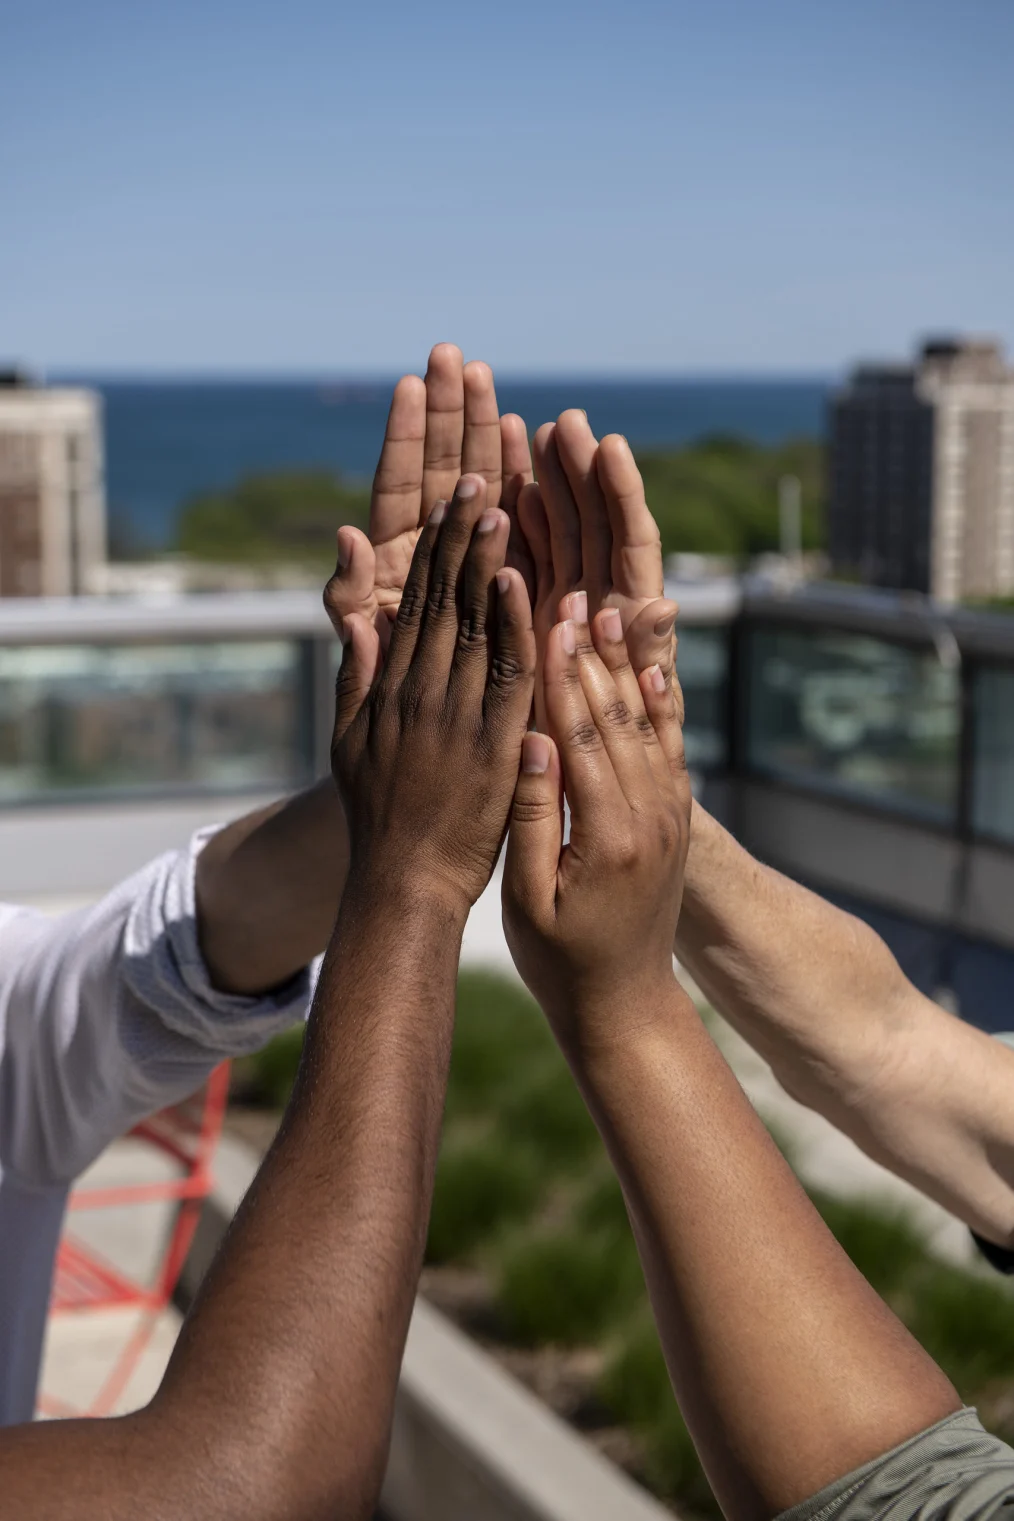 Four hands demonstrate the shape of the Obama Presidential Center tower against the Chicago skyline.